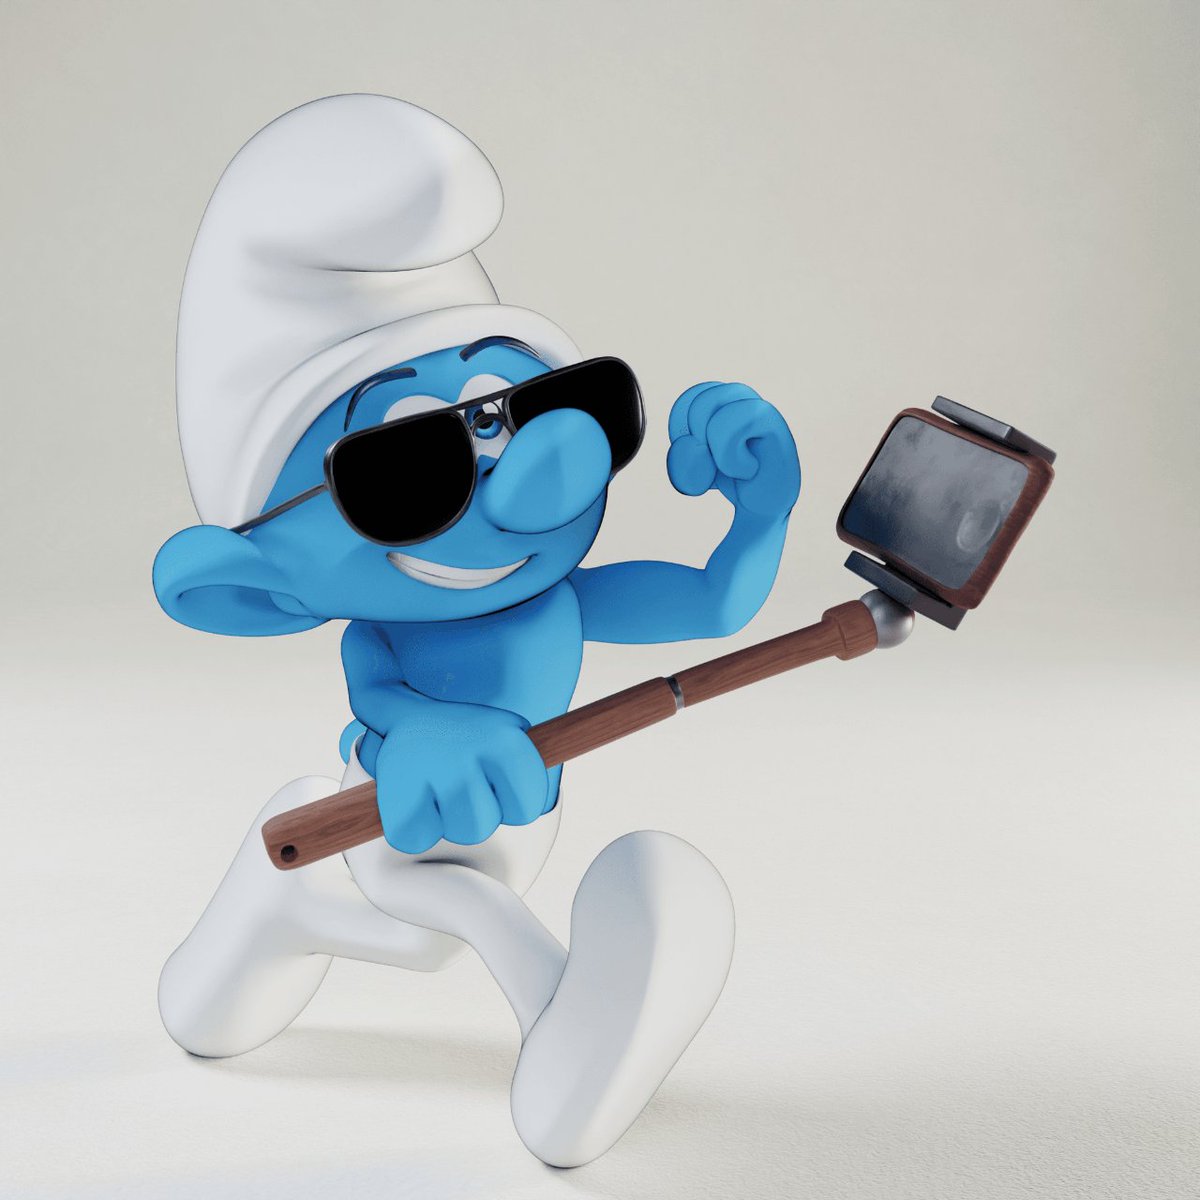 It’s time get the word out about the Smurfs!
Want to win 200,000 points that you can use to get ingredients to play the game?
Check out our new community challenge in Discord for all the rules!
#Smurfs #Game #SmurfsCommunity #TheresASmurfForThat #Challenges